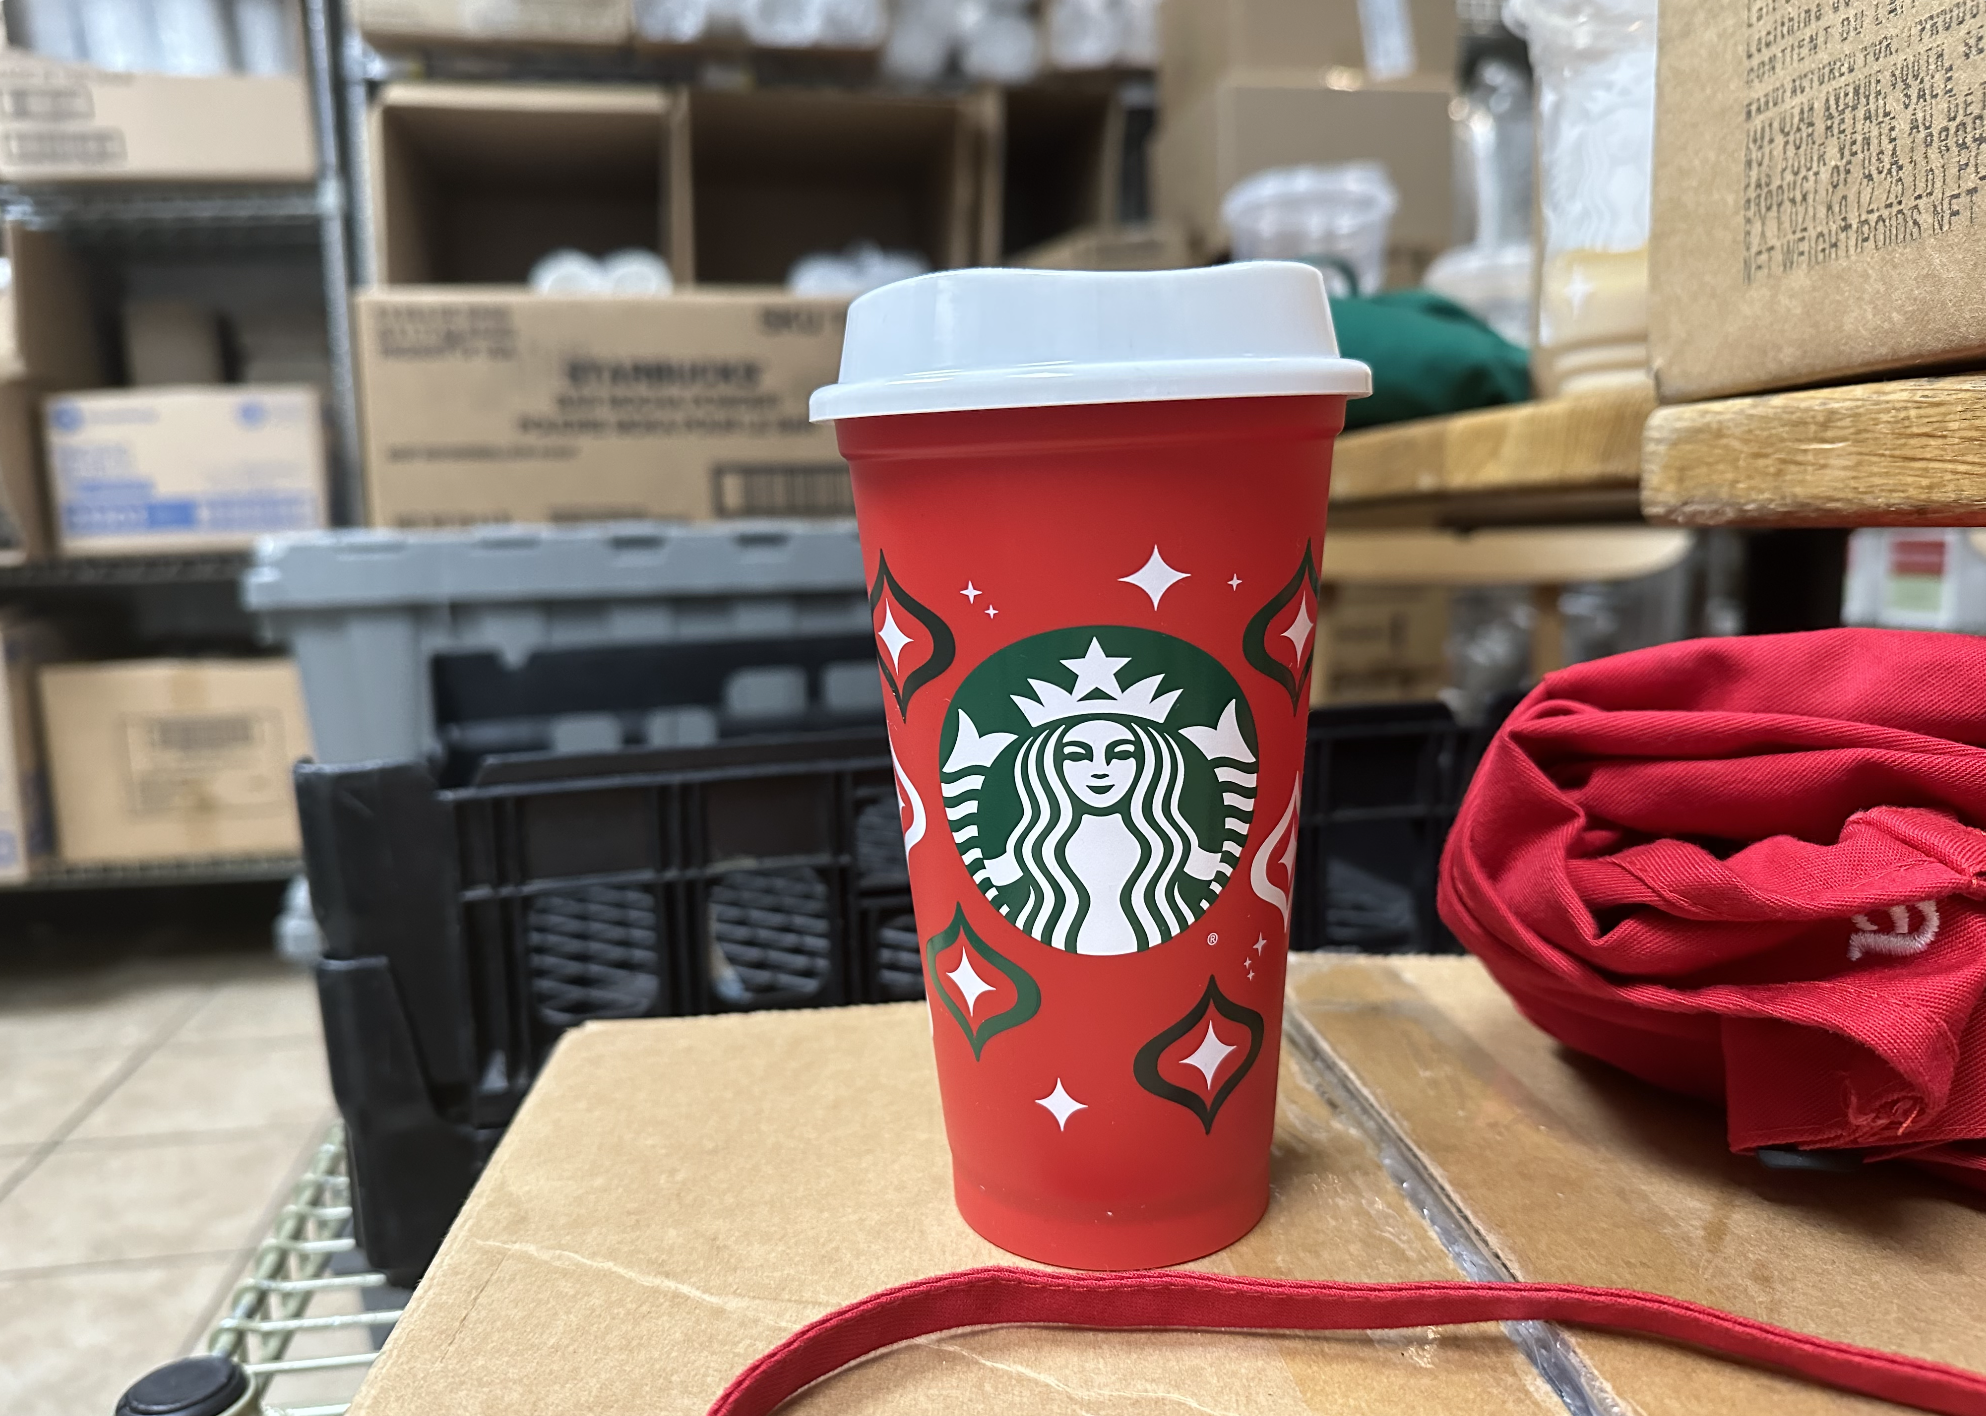 Crap, I forgot to get furious about the Starbucks holiday cup this